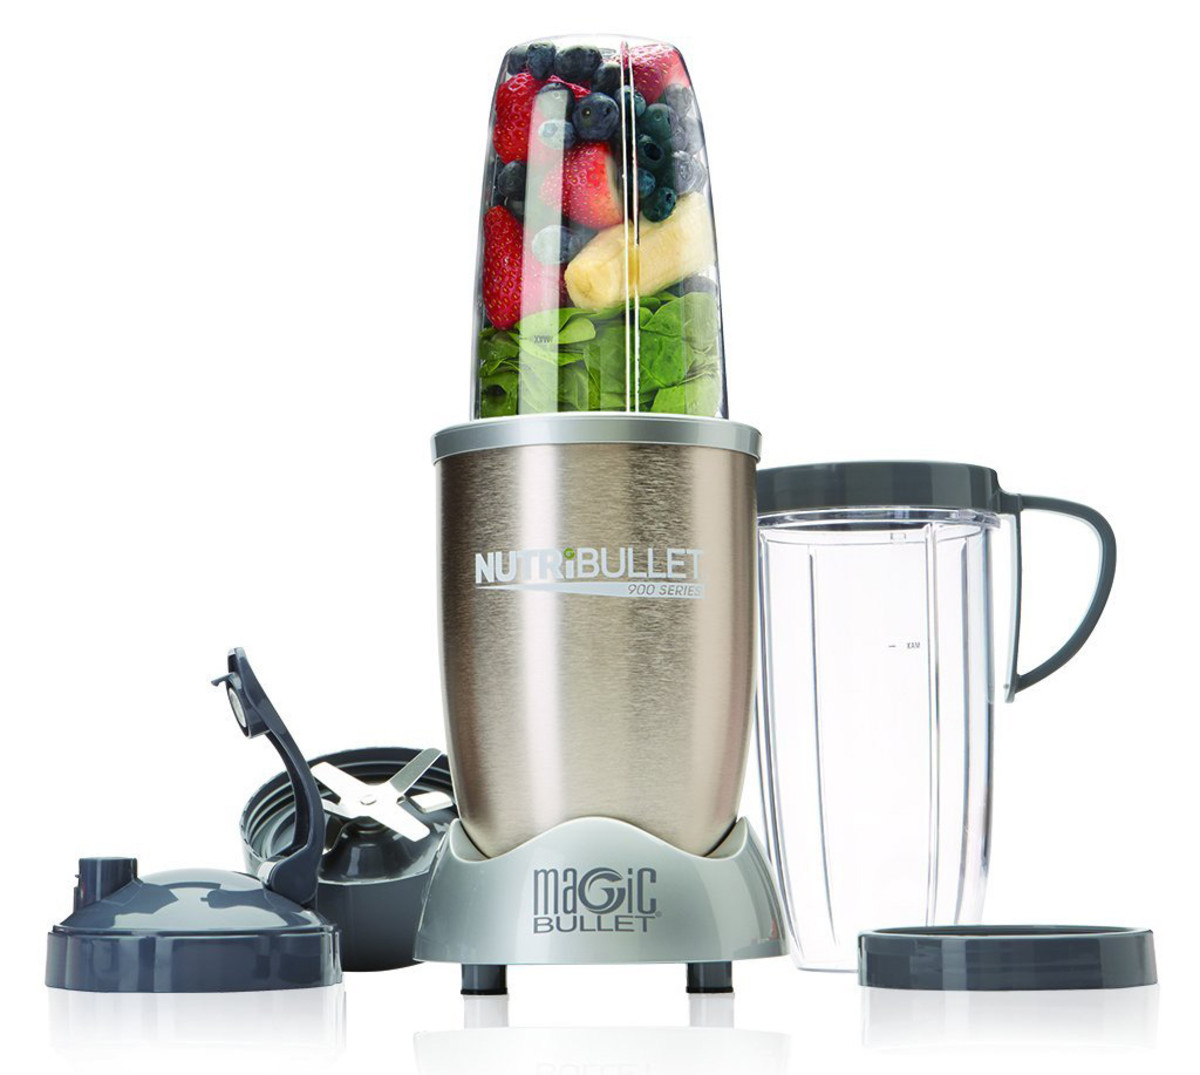 Save $40 on a Nutribullet 900 blender and accessories